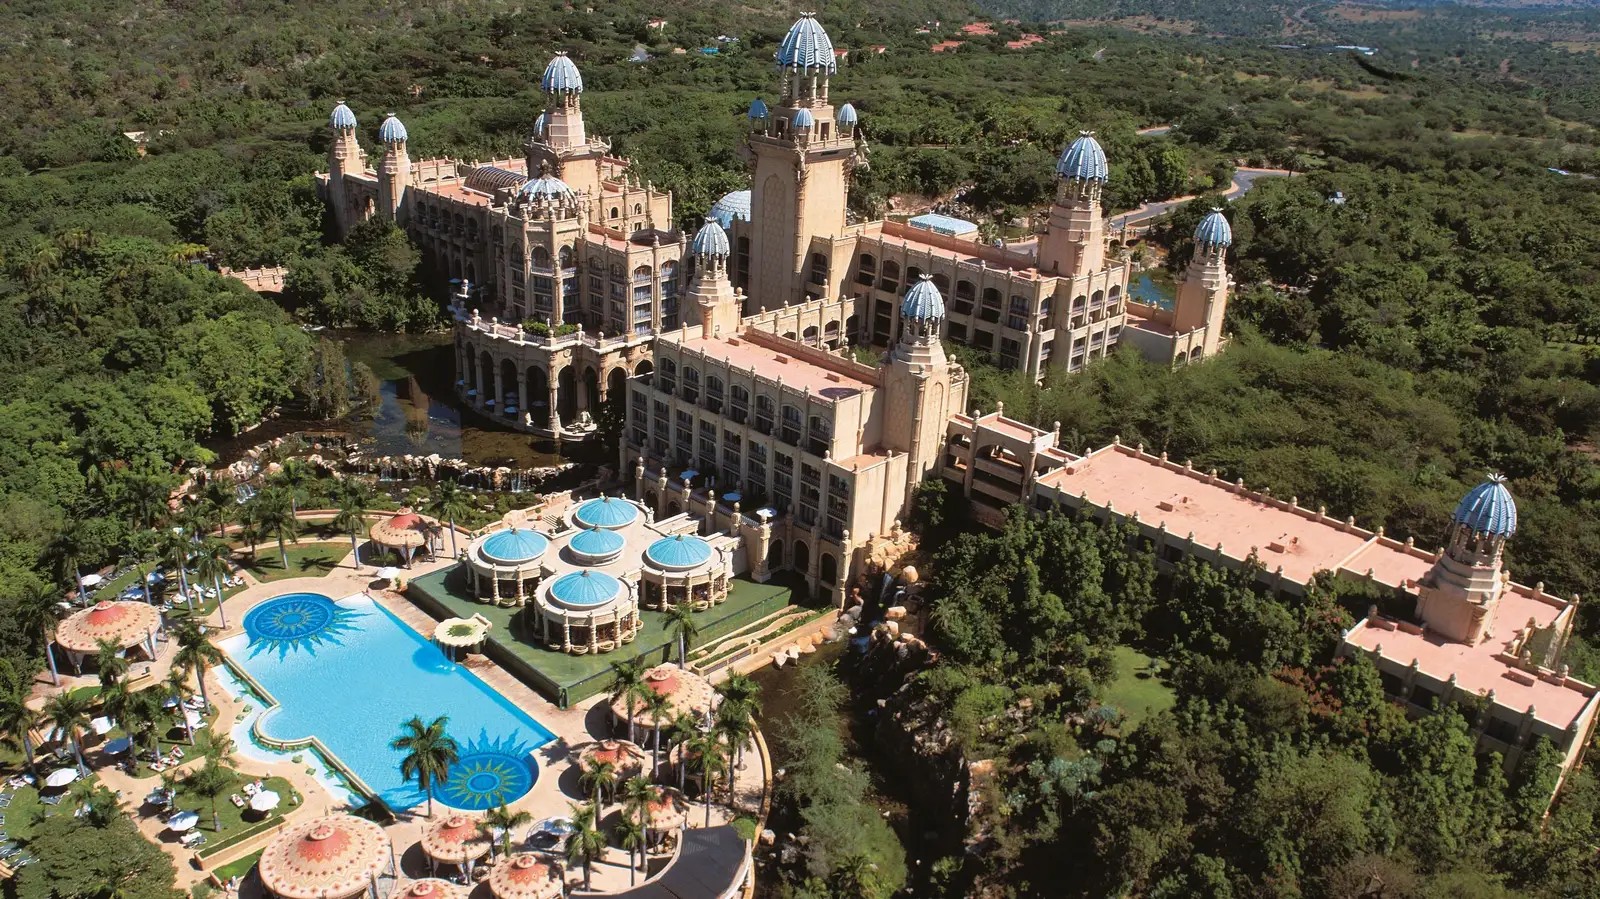 The Palace Of The Lost City at Sun City Resort